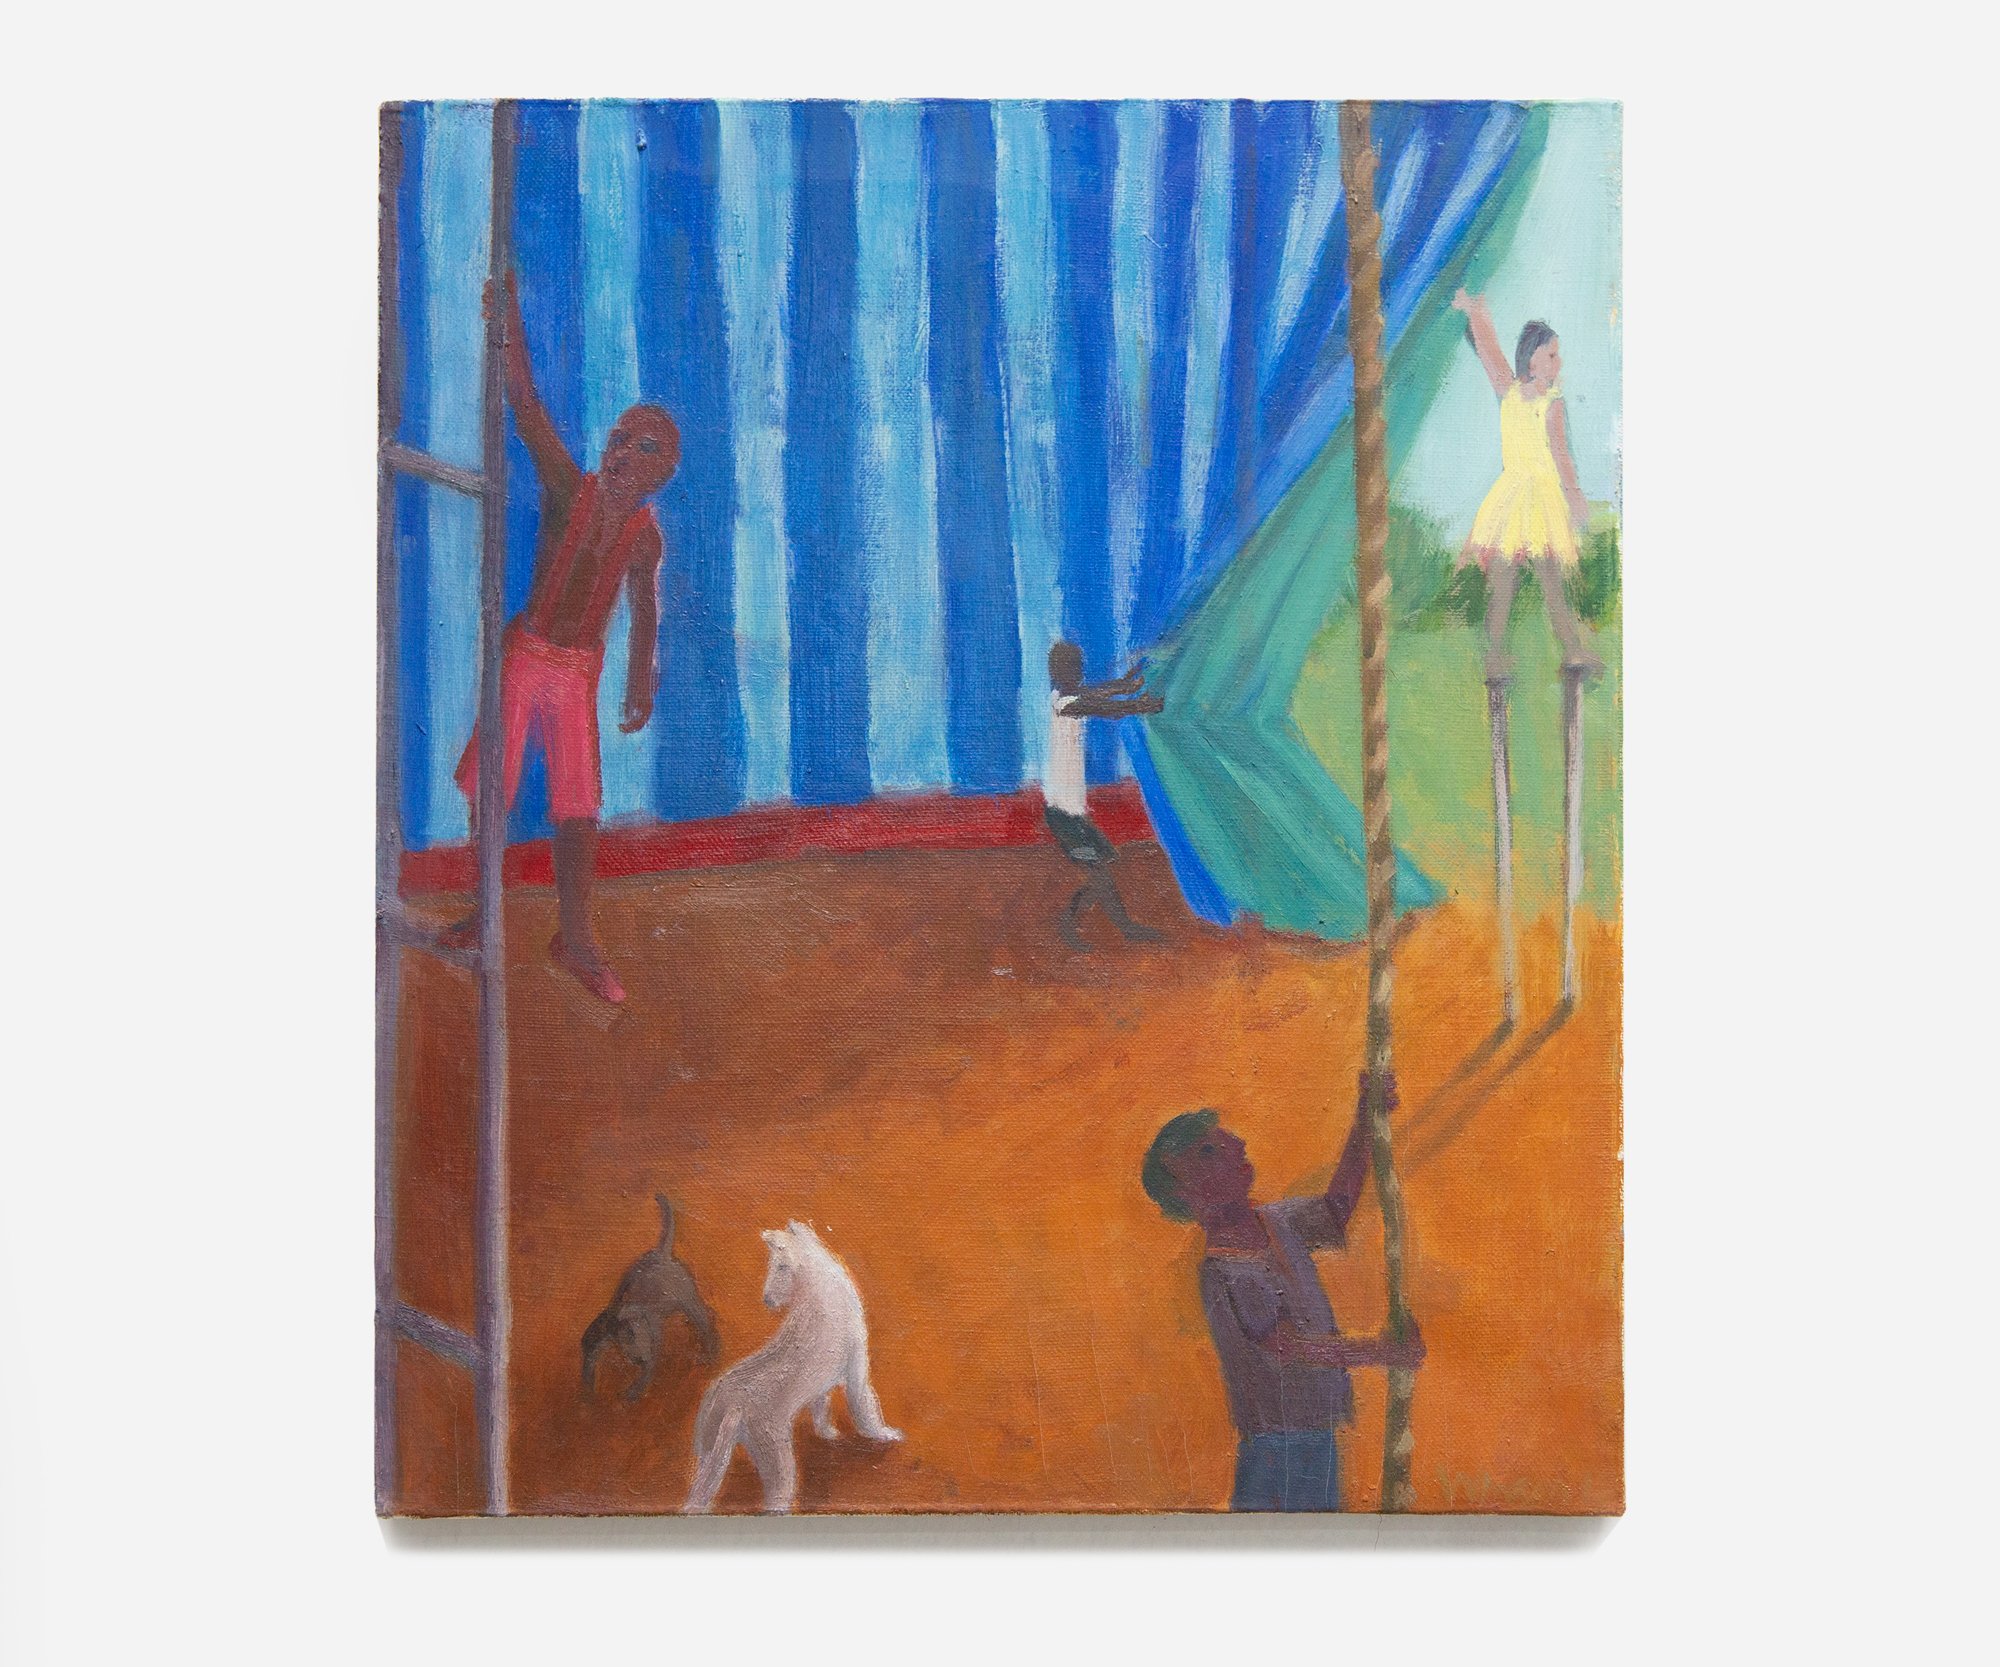   Inside the Tent at the Circus , 2018, Oil on canvas, 14 x 12”       